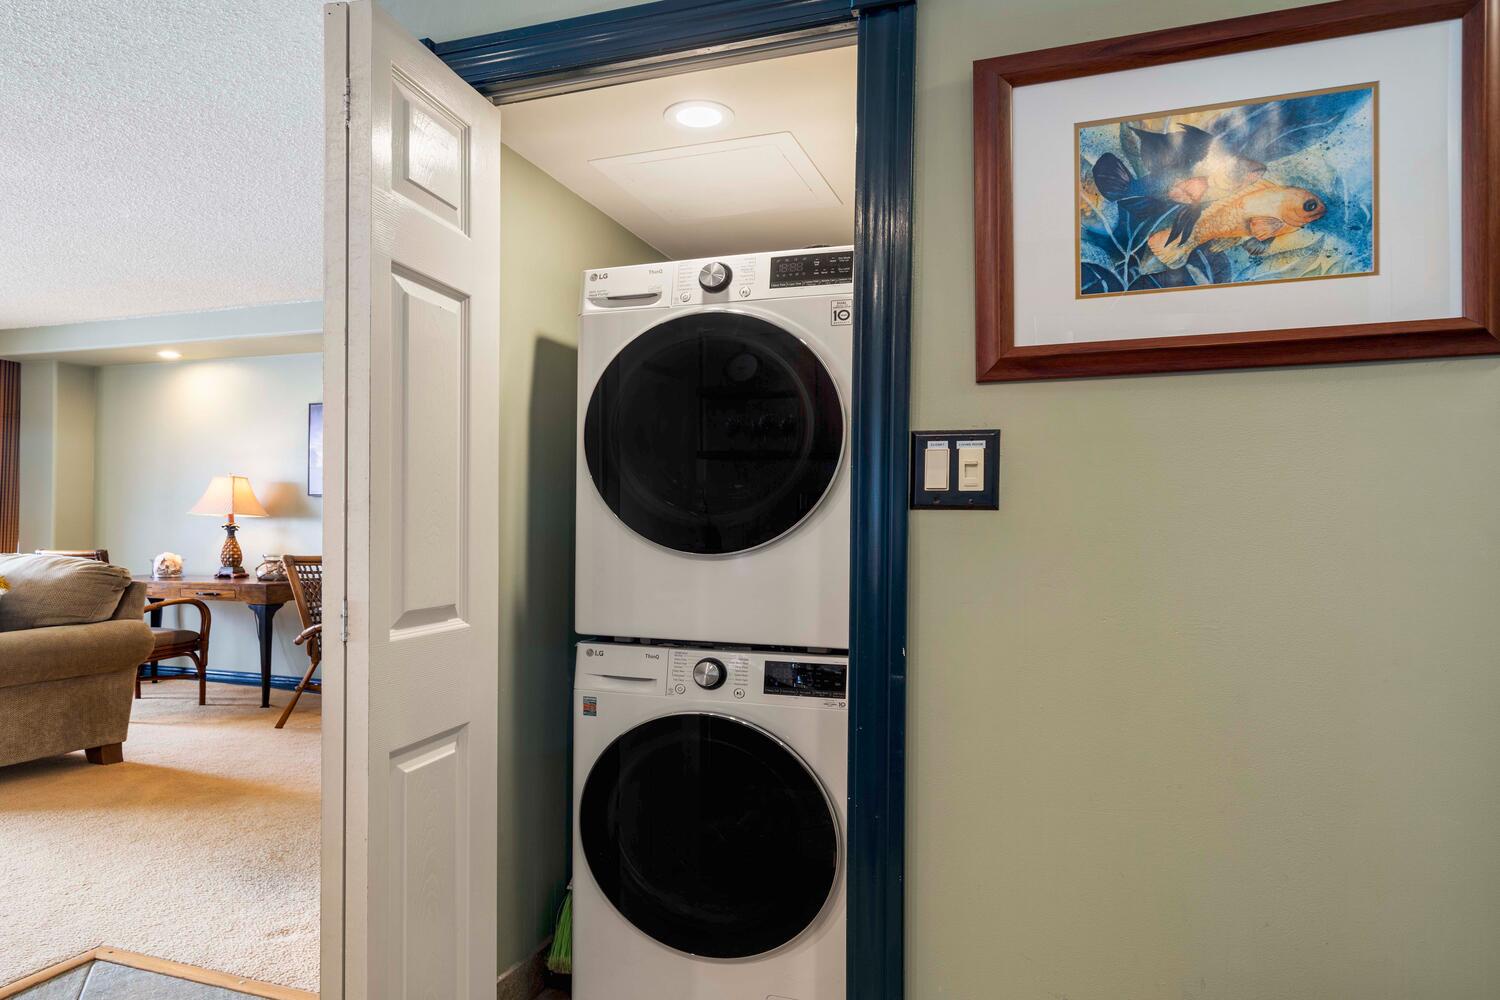 Kailua Kona Vacation Rentals, Kona Alii 302 - In-unit laundry area with a washer and a dryer.